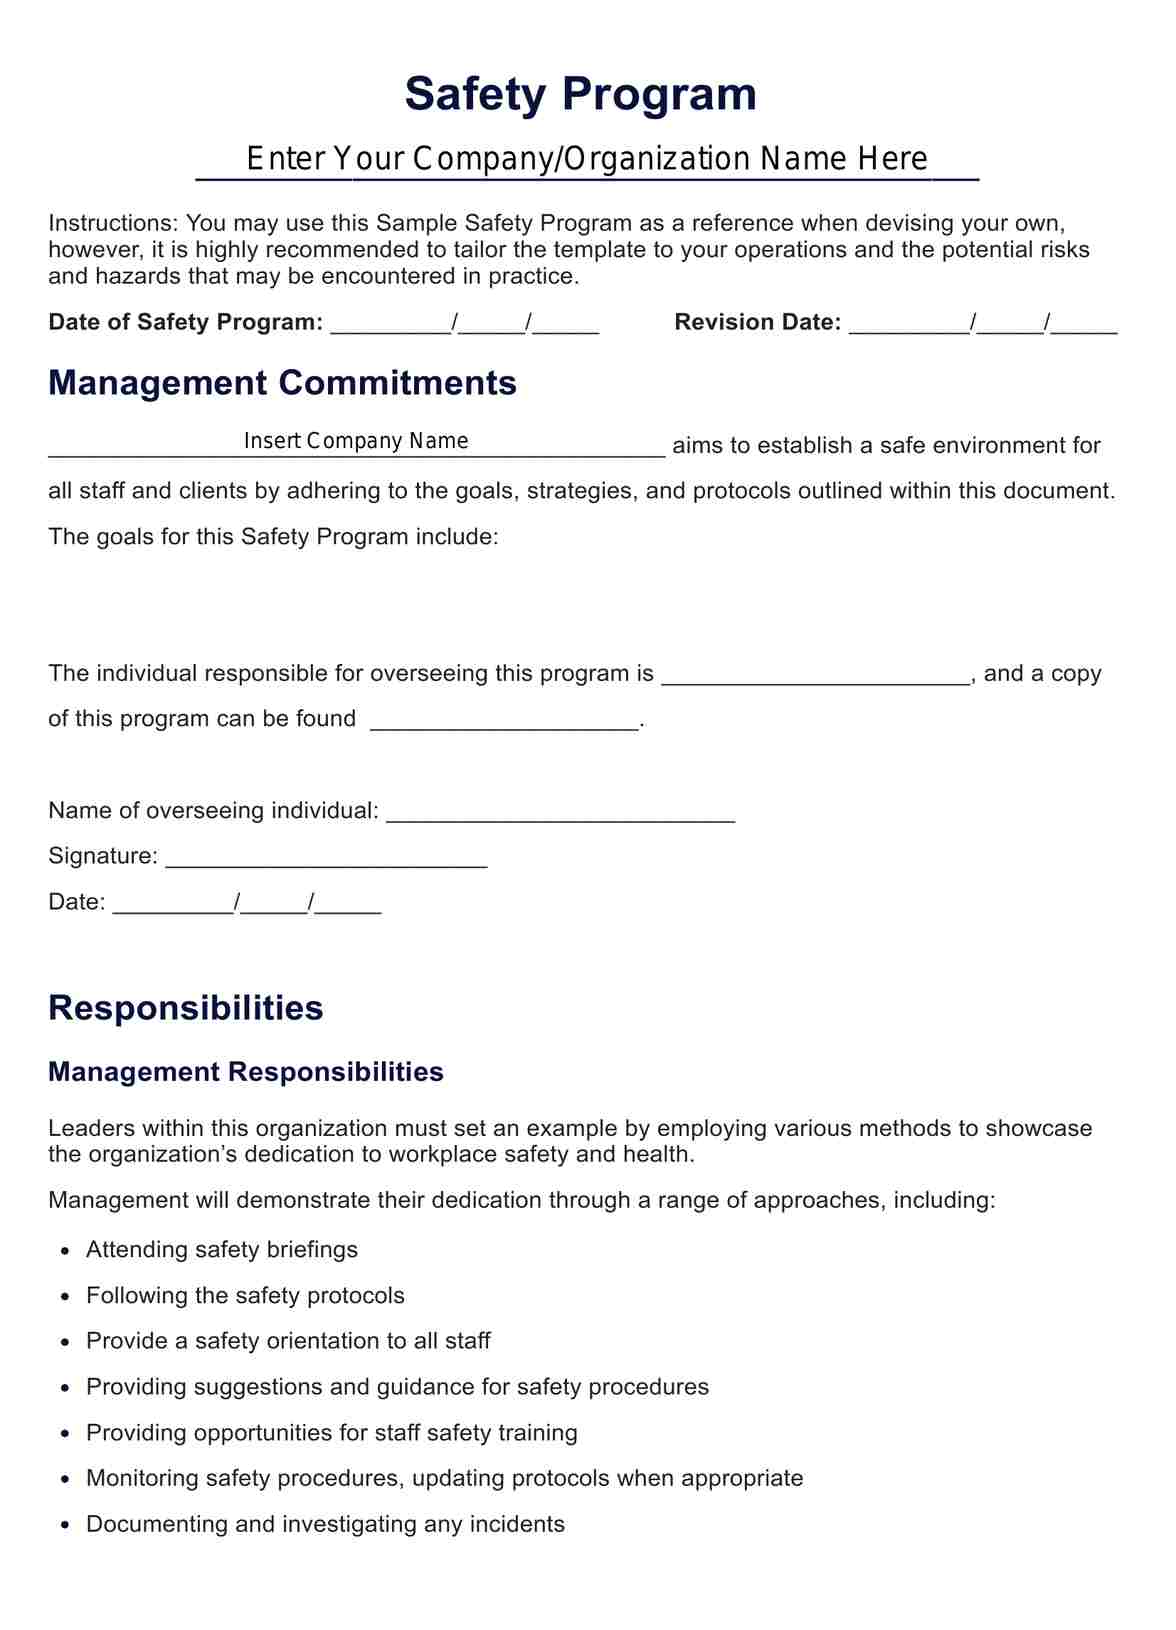 Safety Program Template PDF Example